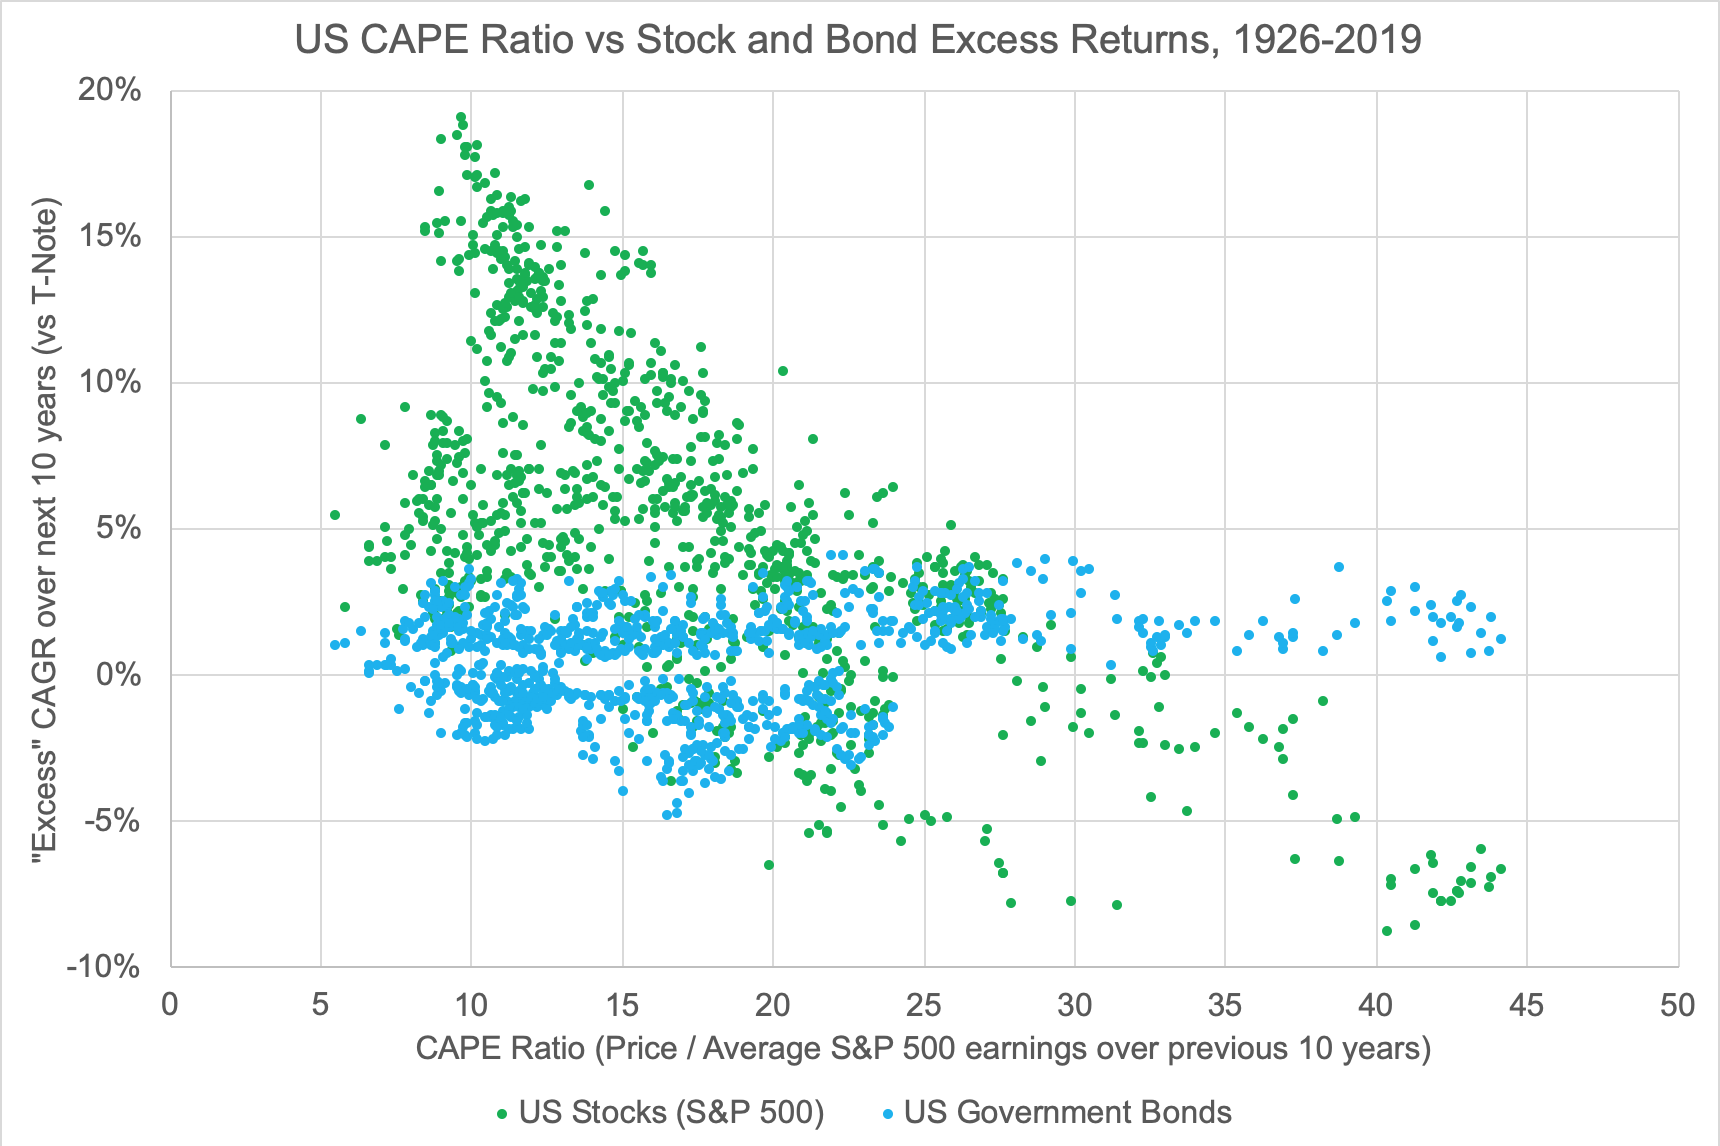 Expected Return of Stocks and Bonds vs CAPE Ratio